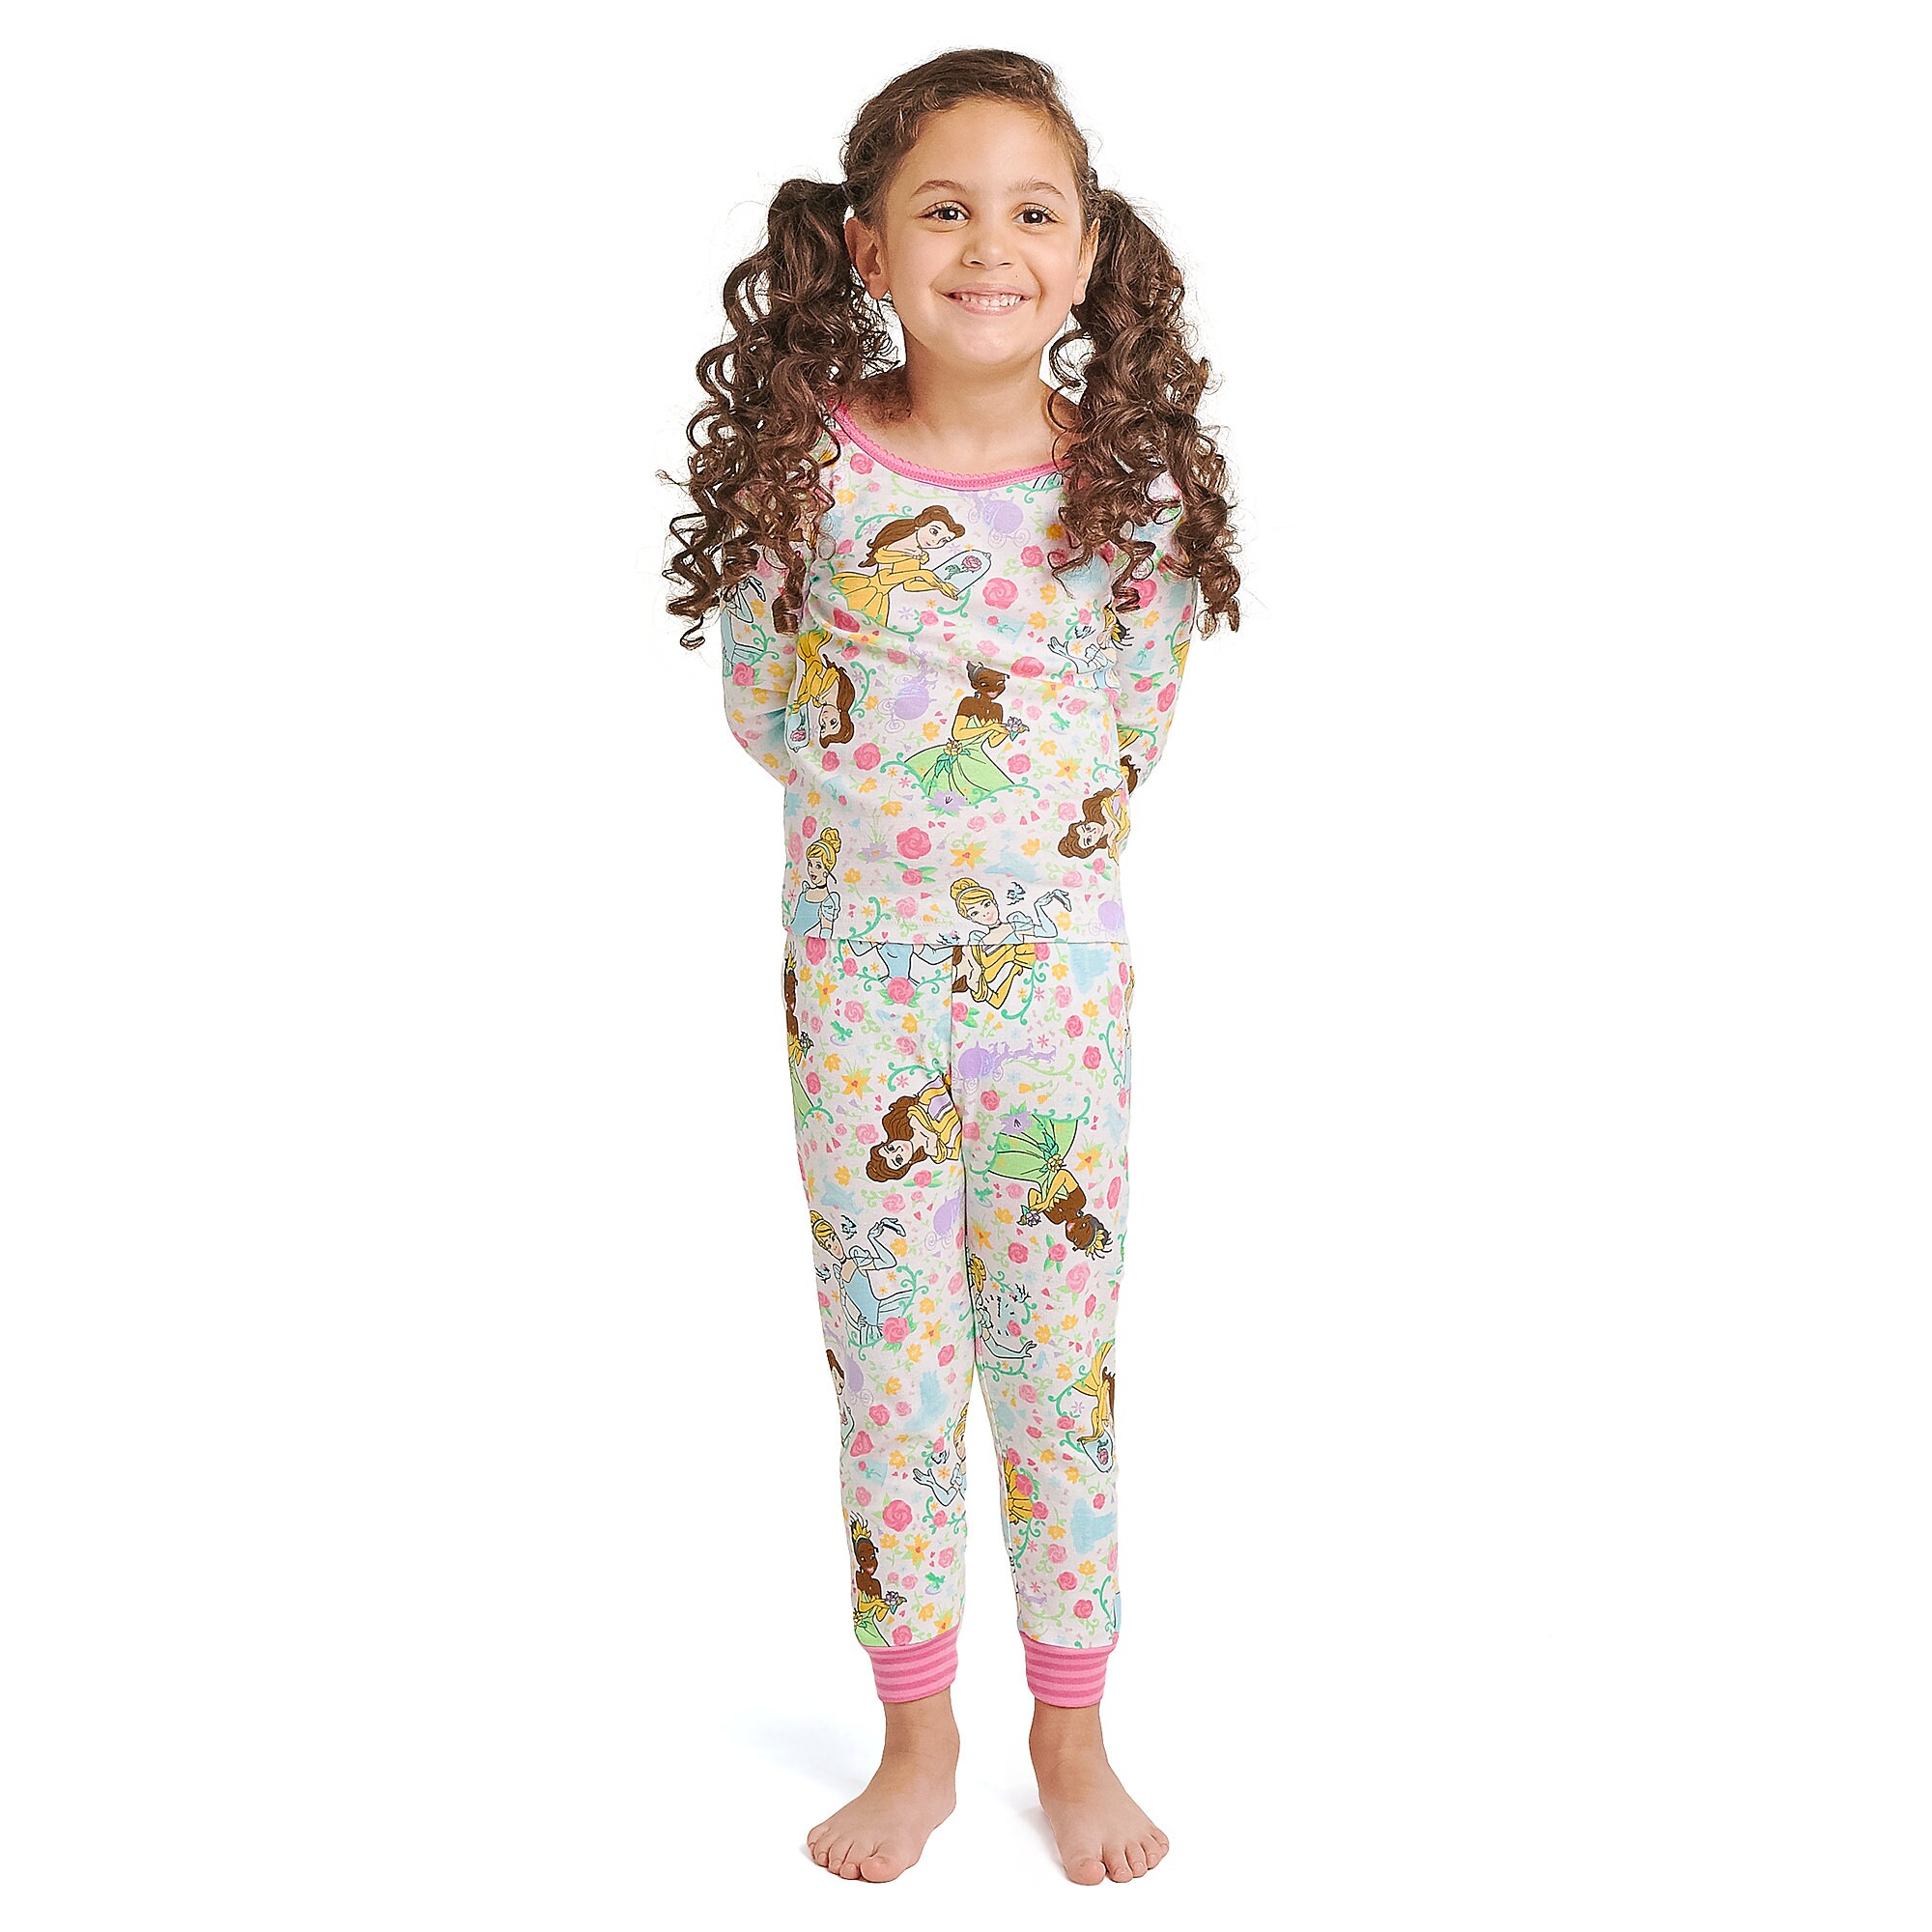 Disney Princess PJ PALS for Girls was released today – Dis Merchandise News